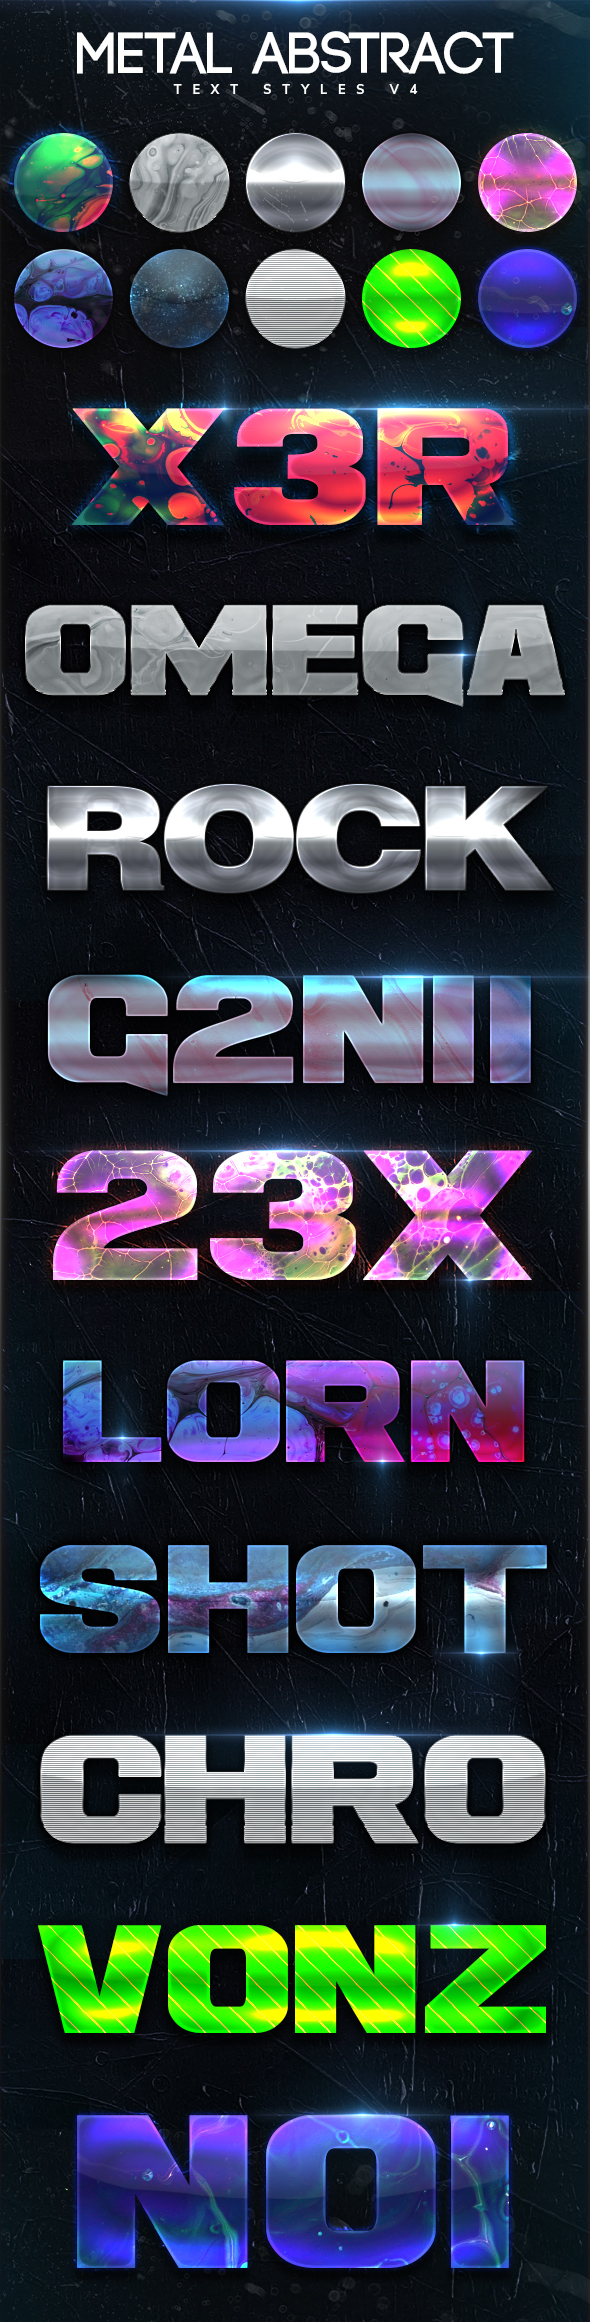 Metal Abstract Text Styles V4